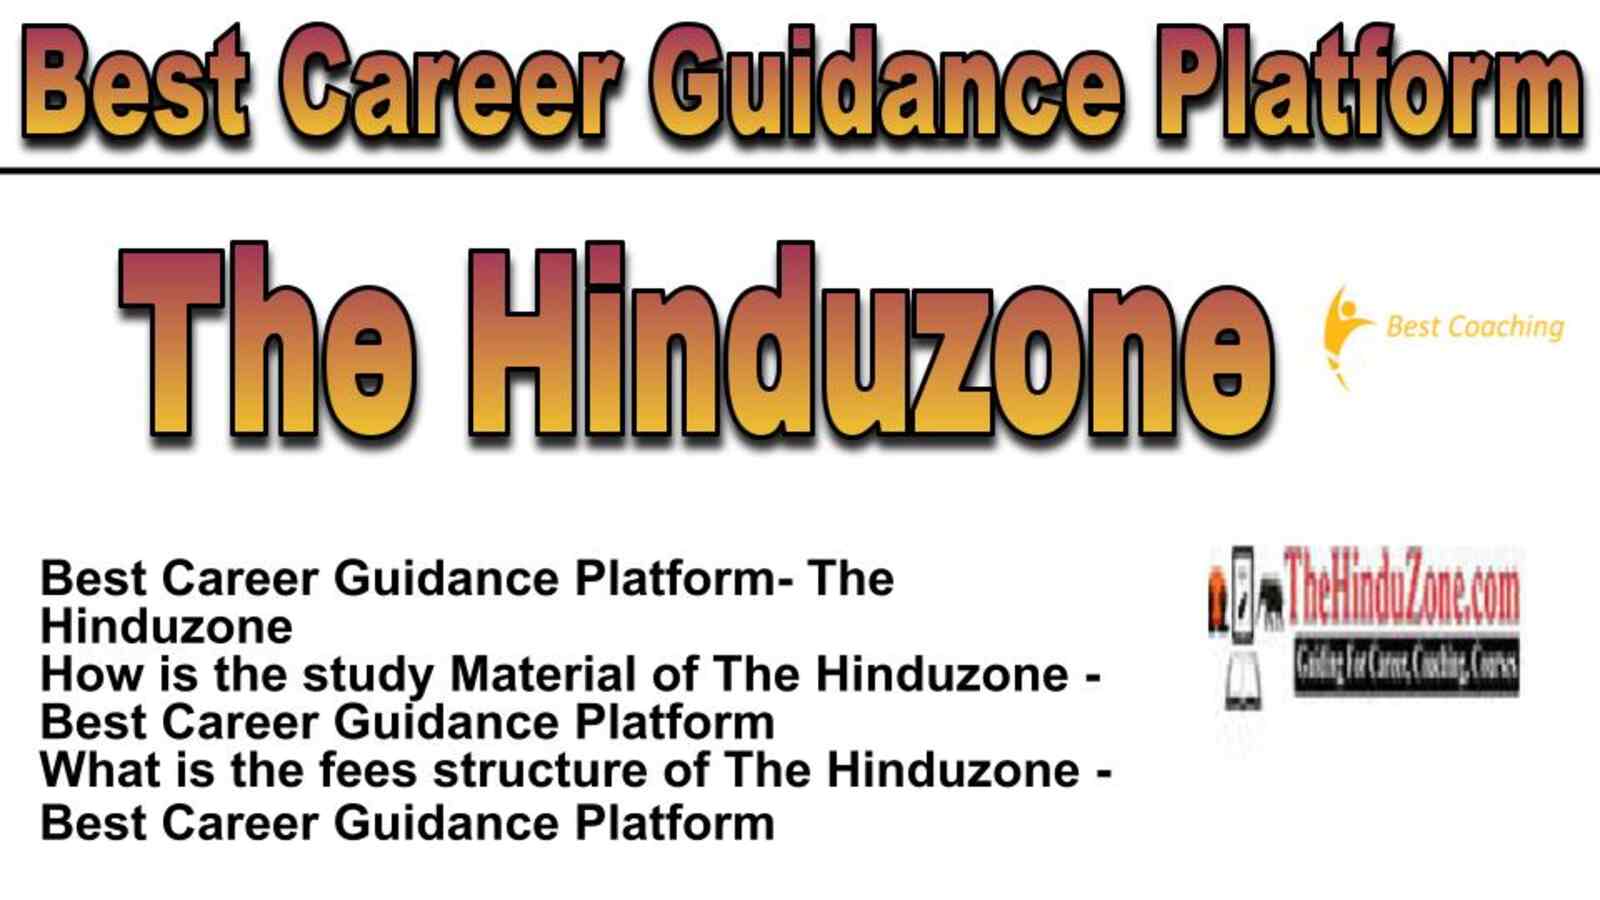 BEST CAREER GUIDANCE THE HINDUZONE